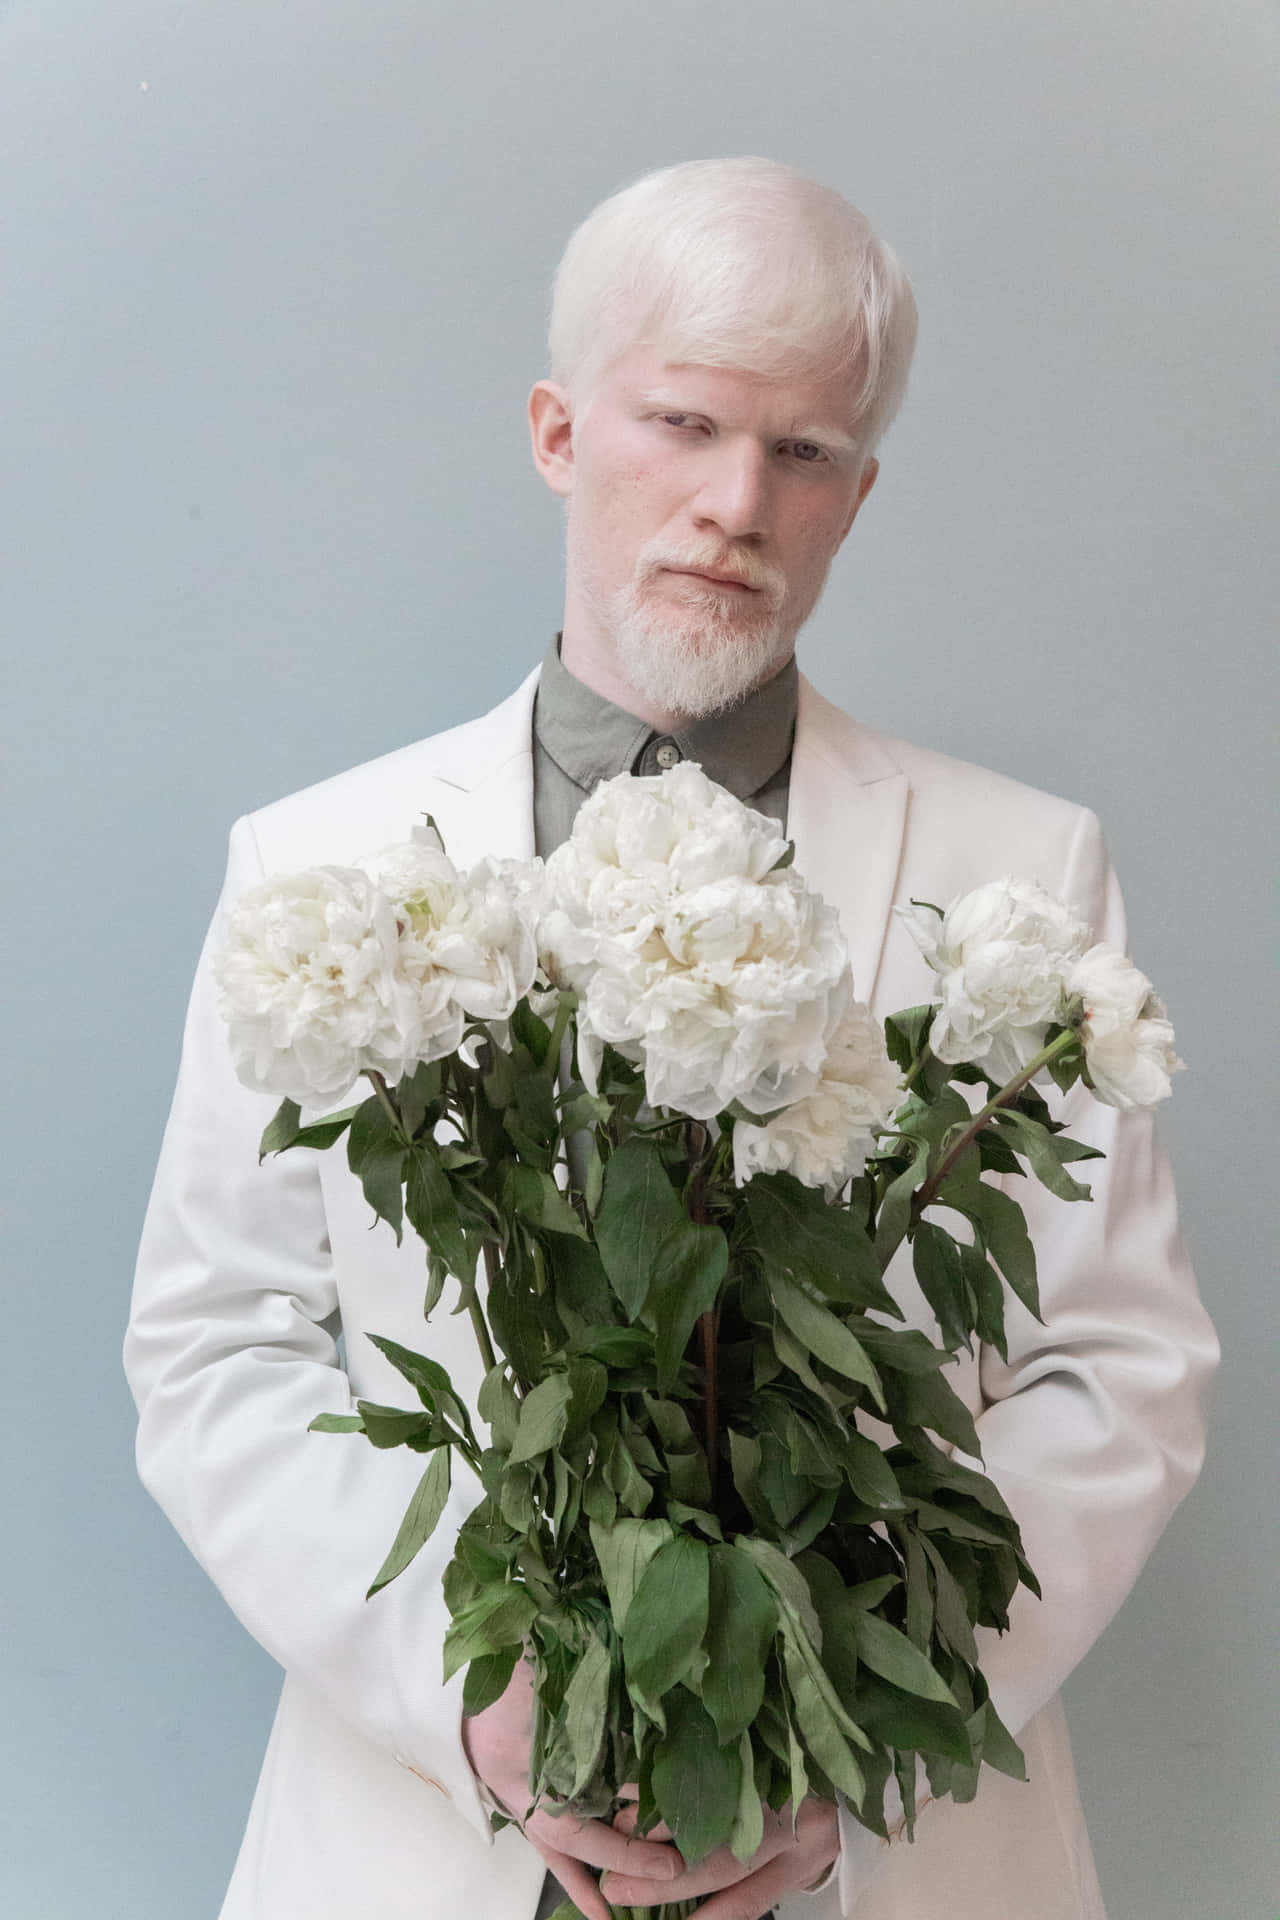 Exceptional Albino Man Holding Flowers Wallpaper